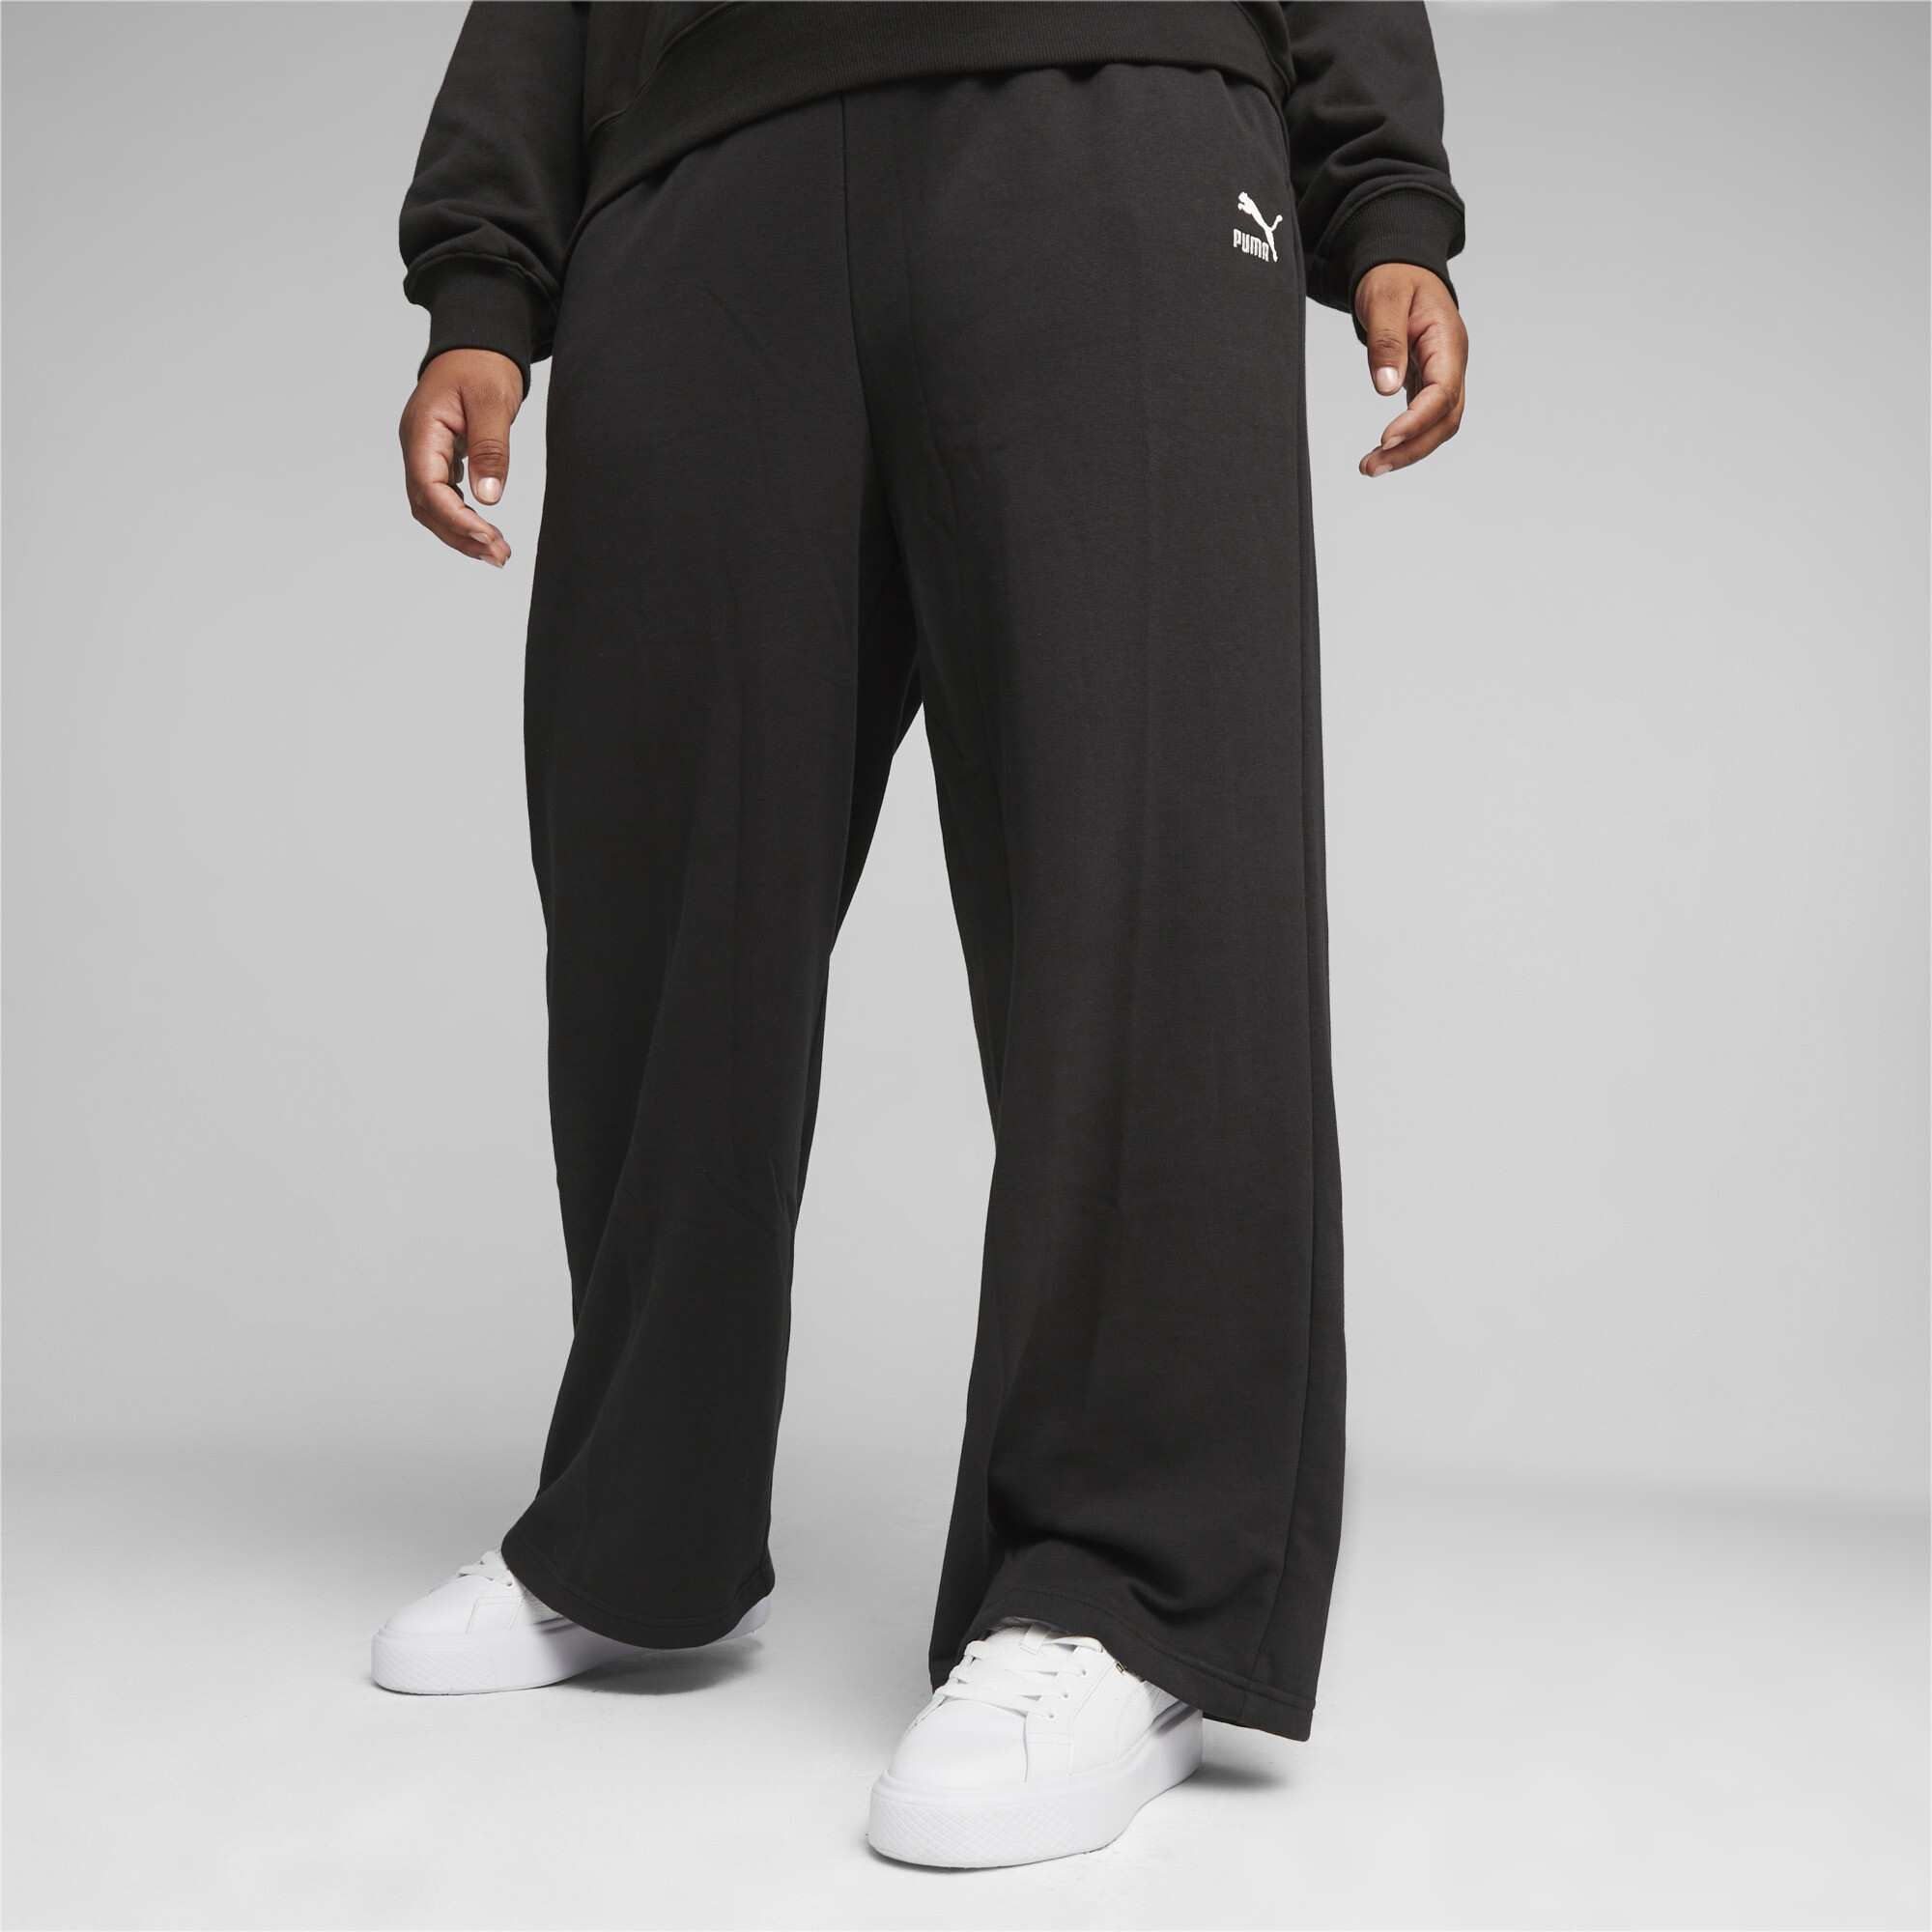 Women's PUMA CLASSICS Relaxed Sweatpants In Black, Size Large